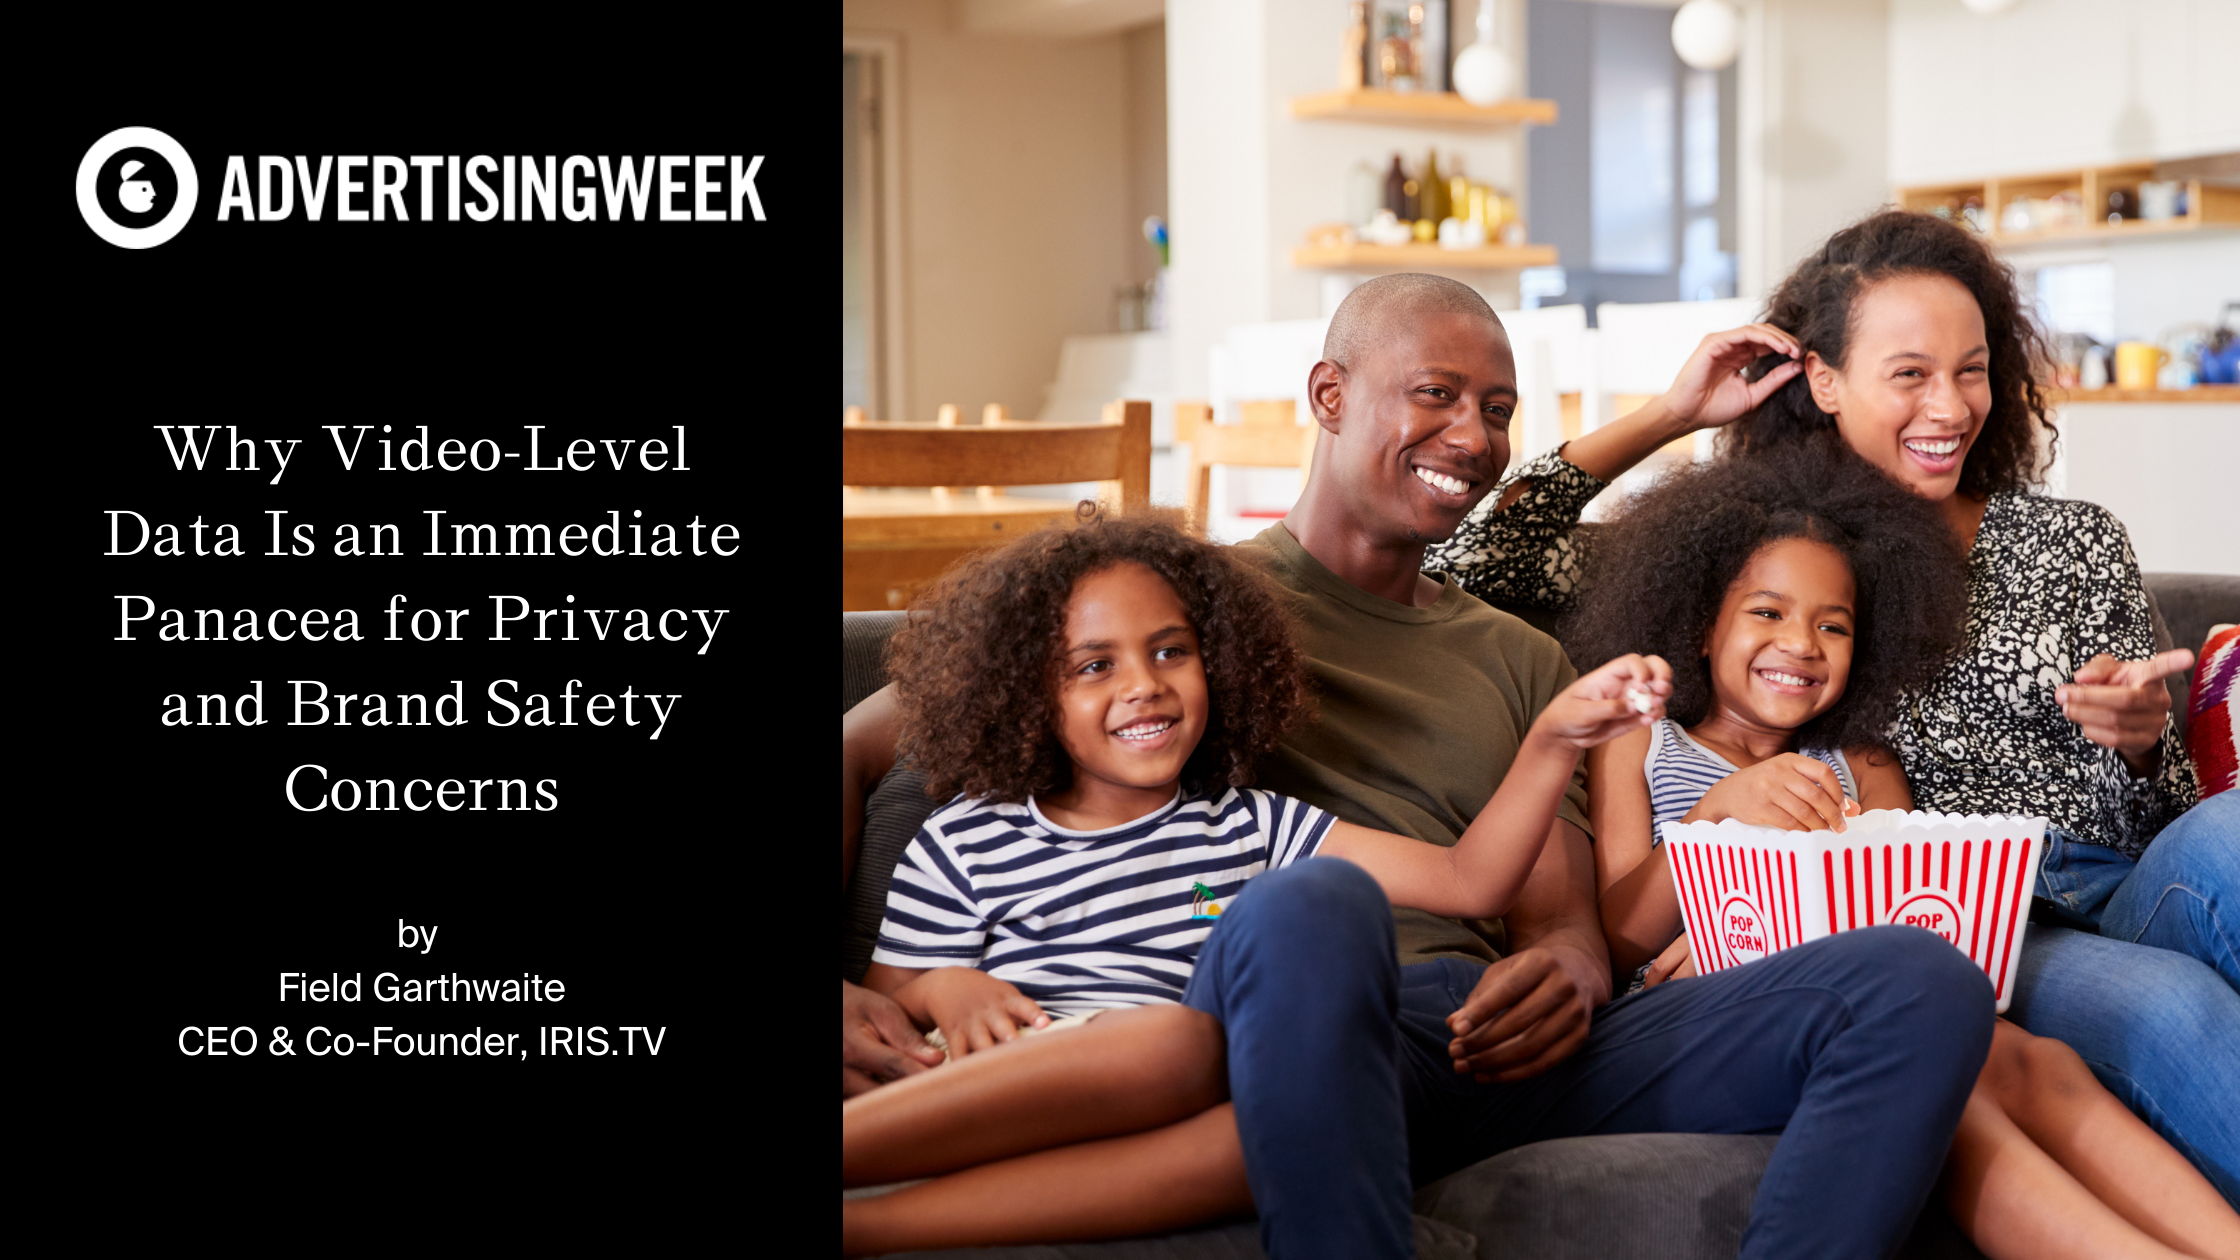 Advertising Week: Why Video-Level Data Is an Immediate Panacea for Privacy and Brand Safety Concerns